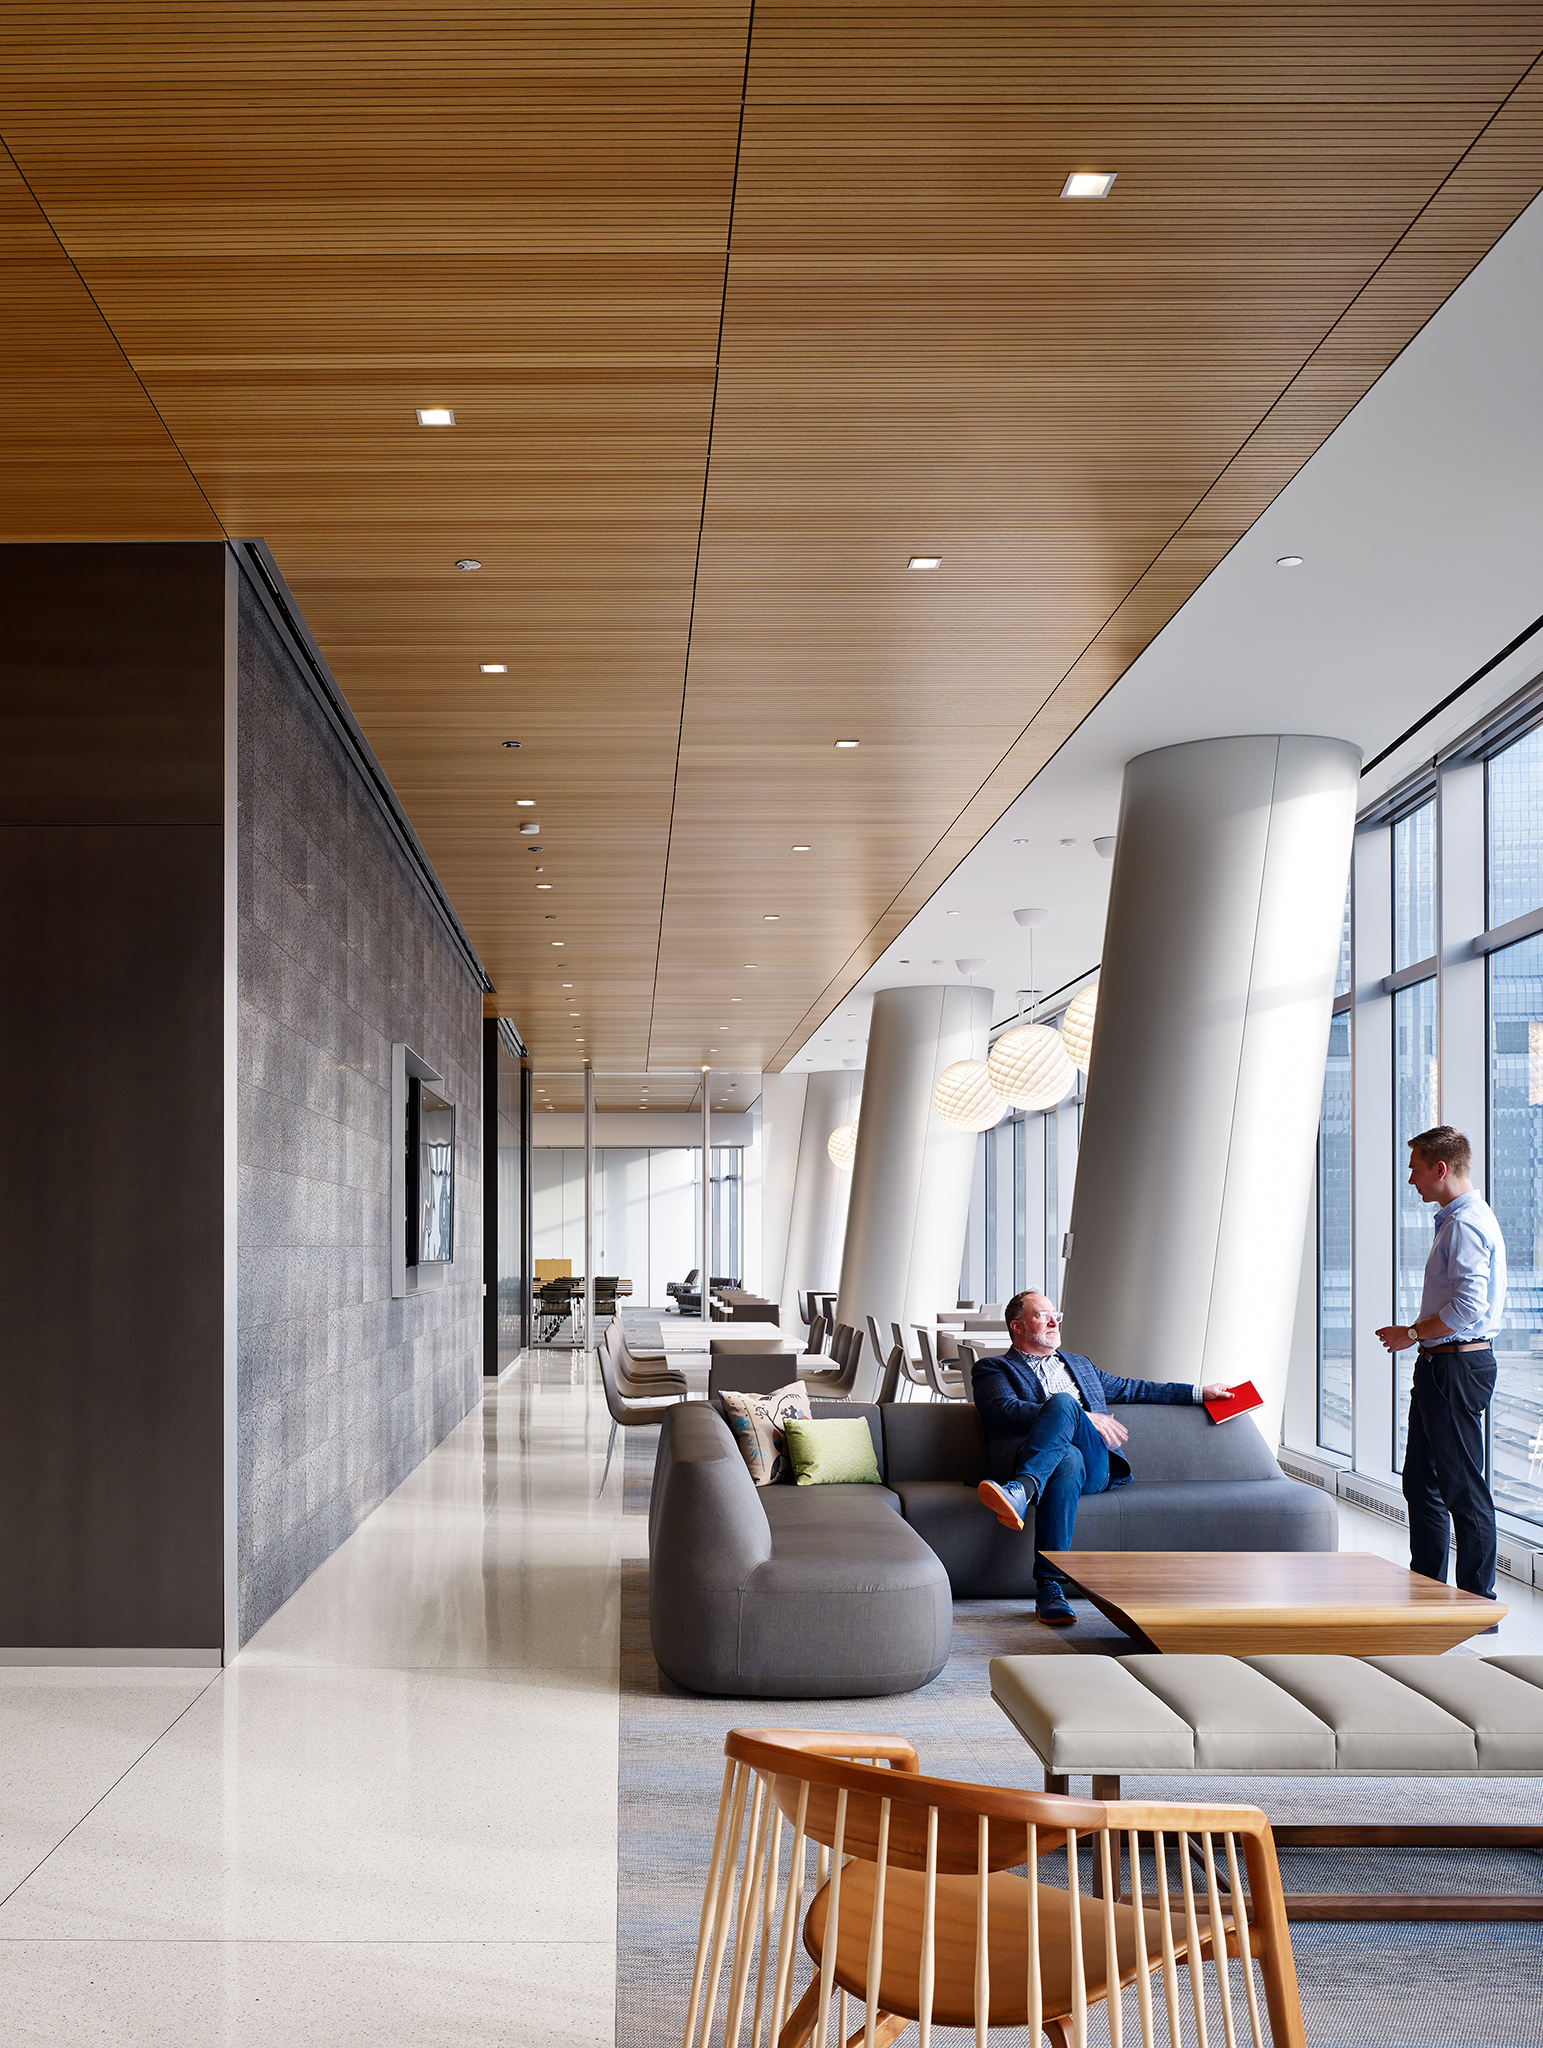  DLA Piper LLP  Gensler  Chicago, IL      Return to Projects  